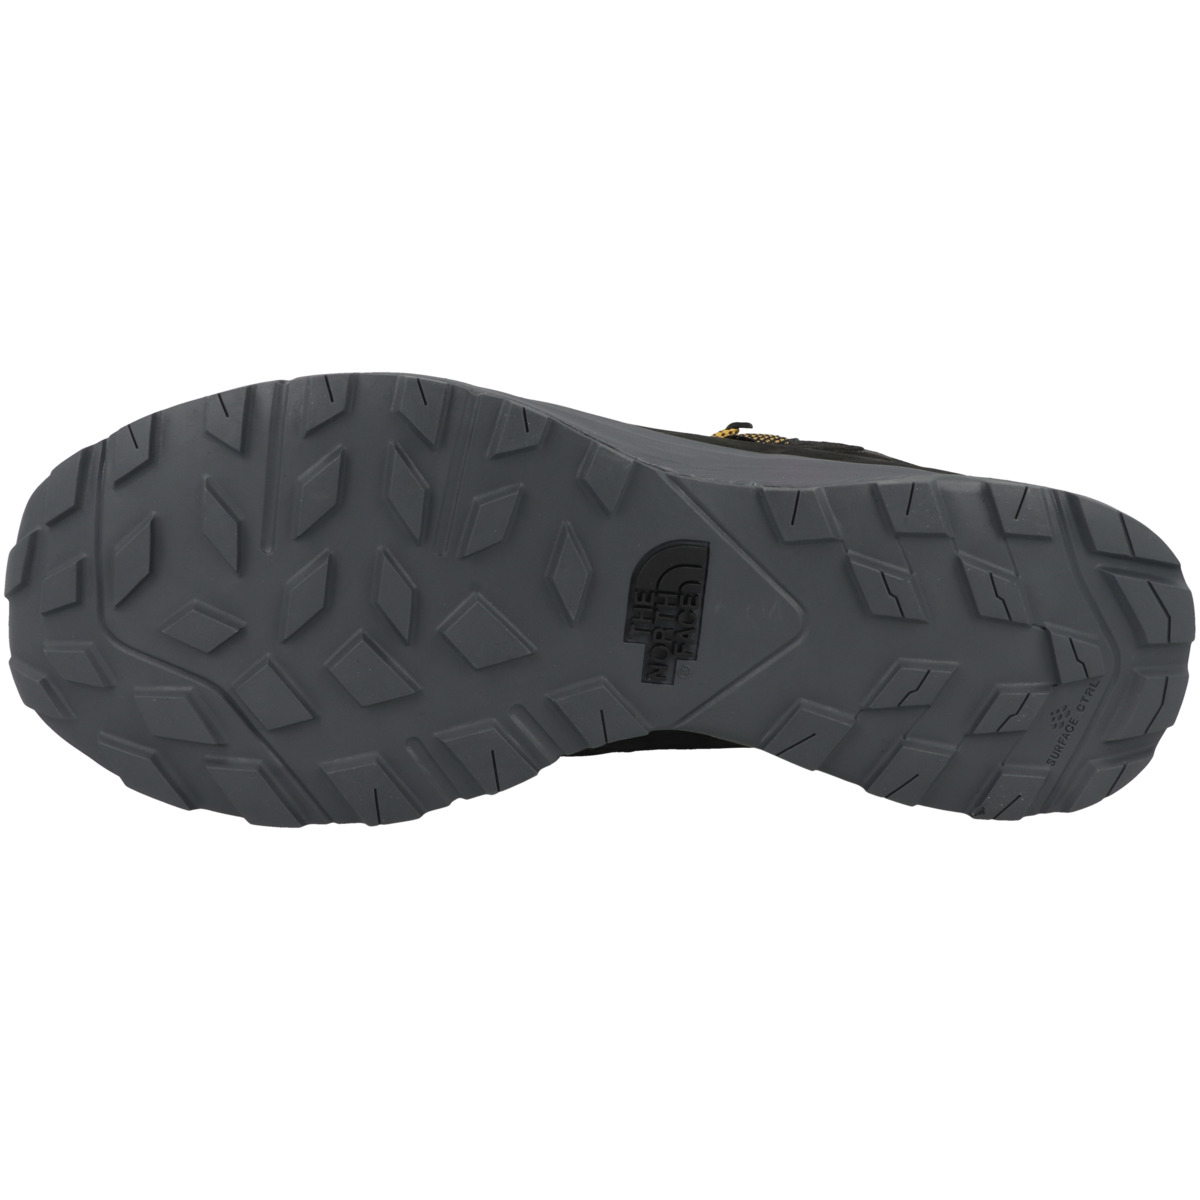 The North Face M Cragstone Leather Mid Outdoorschuhe schwarz